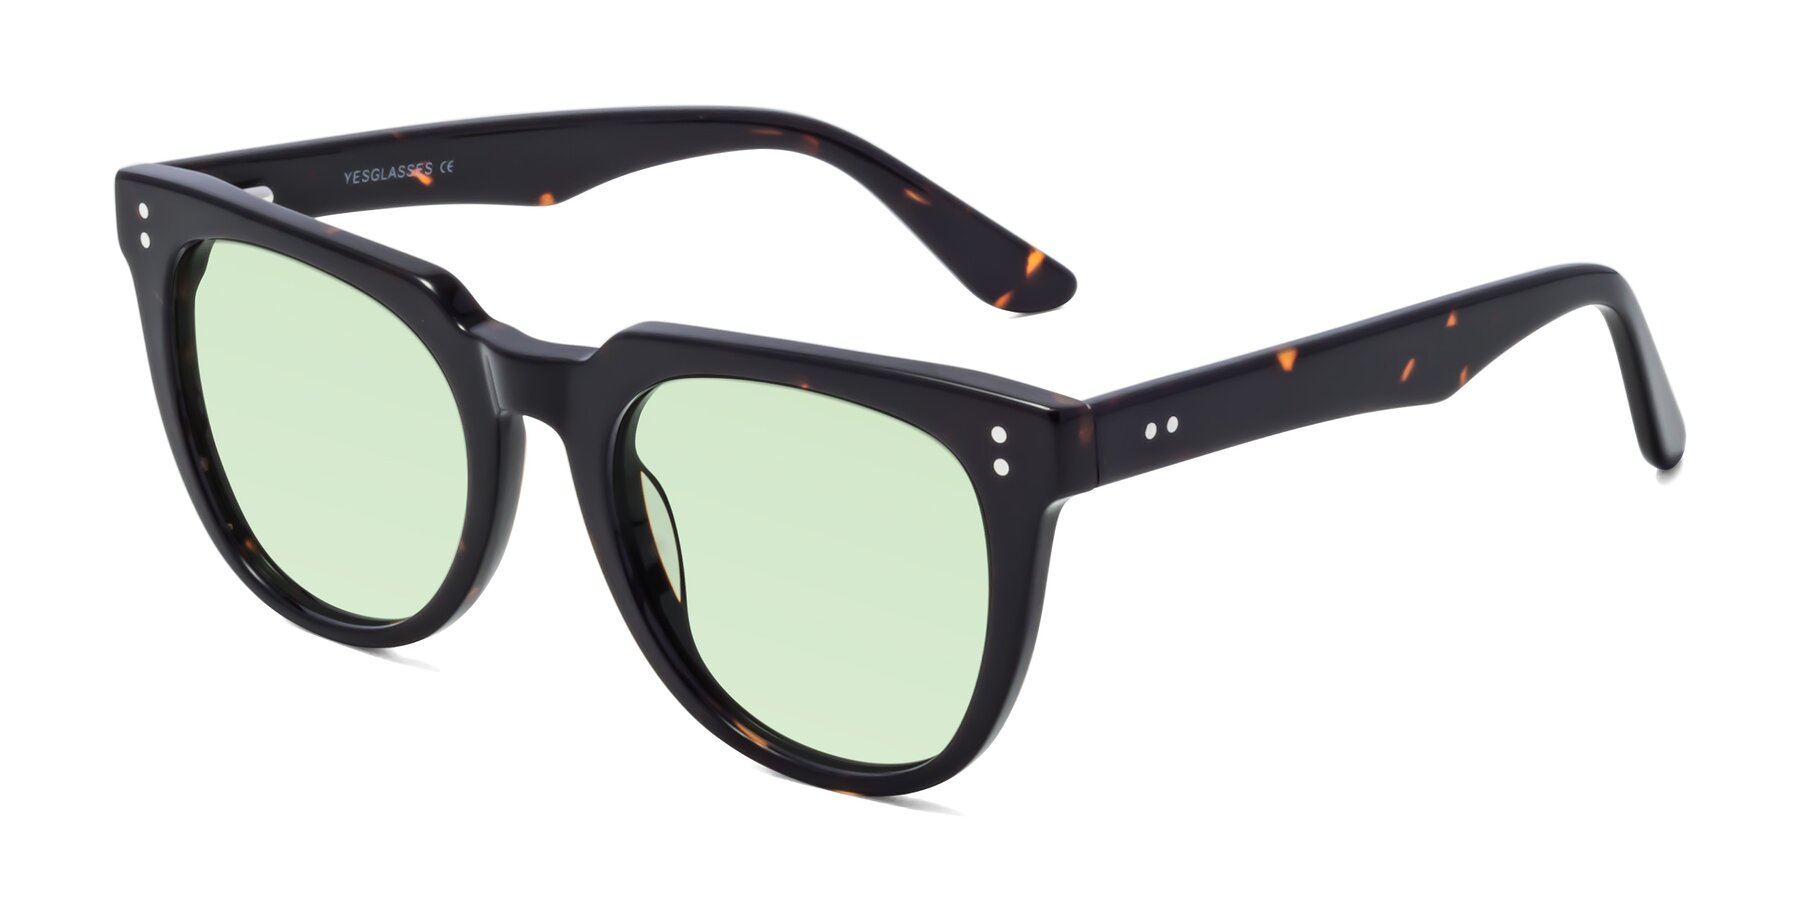 Angle of Graceful in Tortoise with Light Green Tinted Lenses